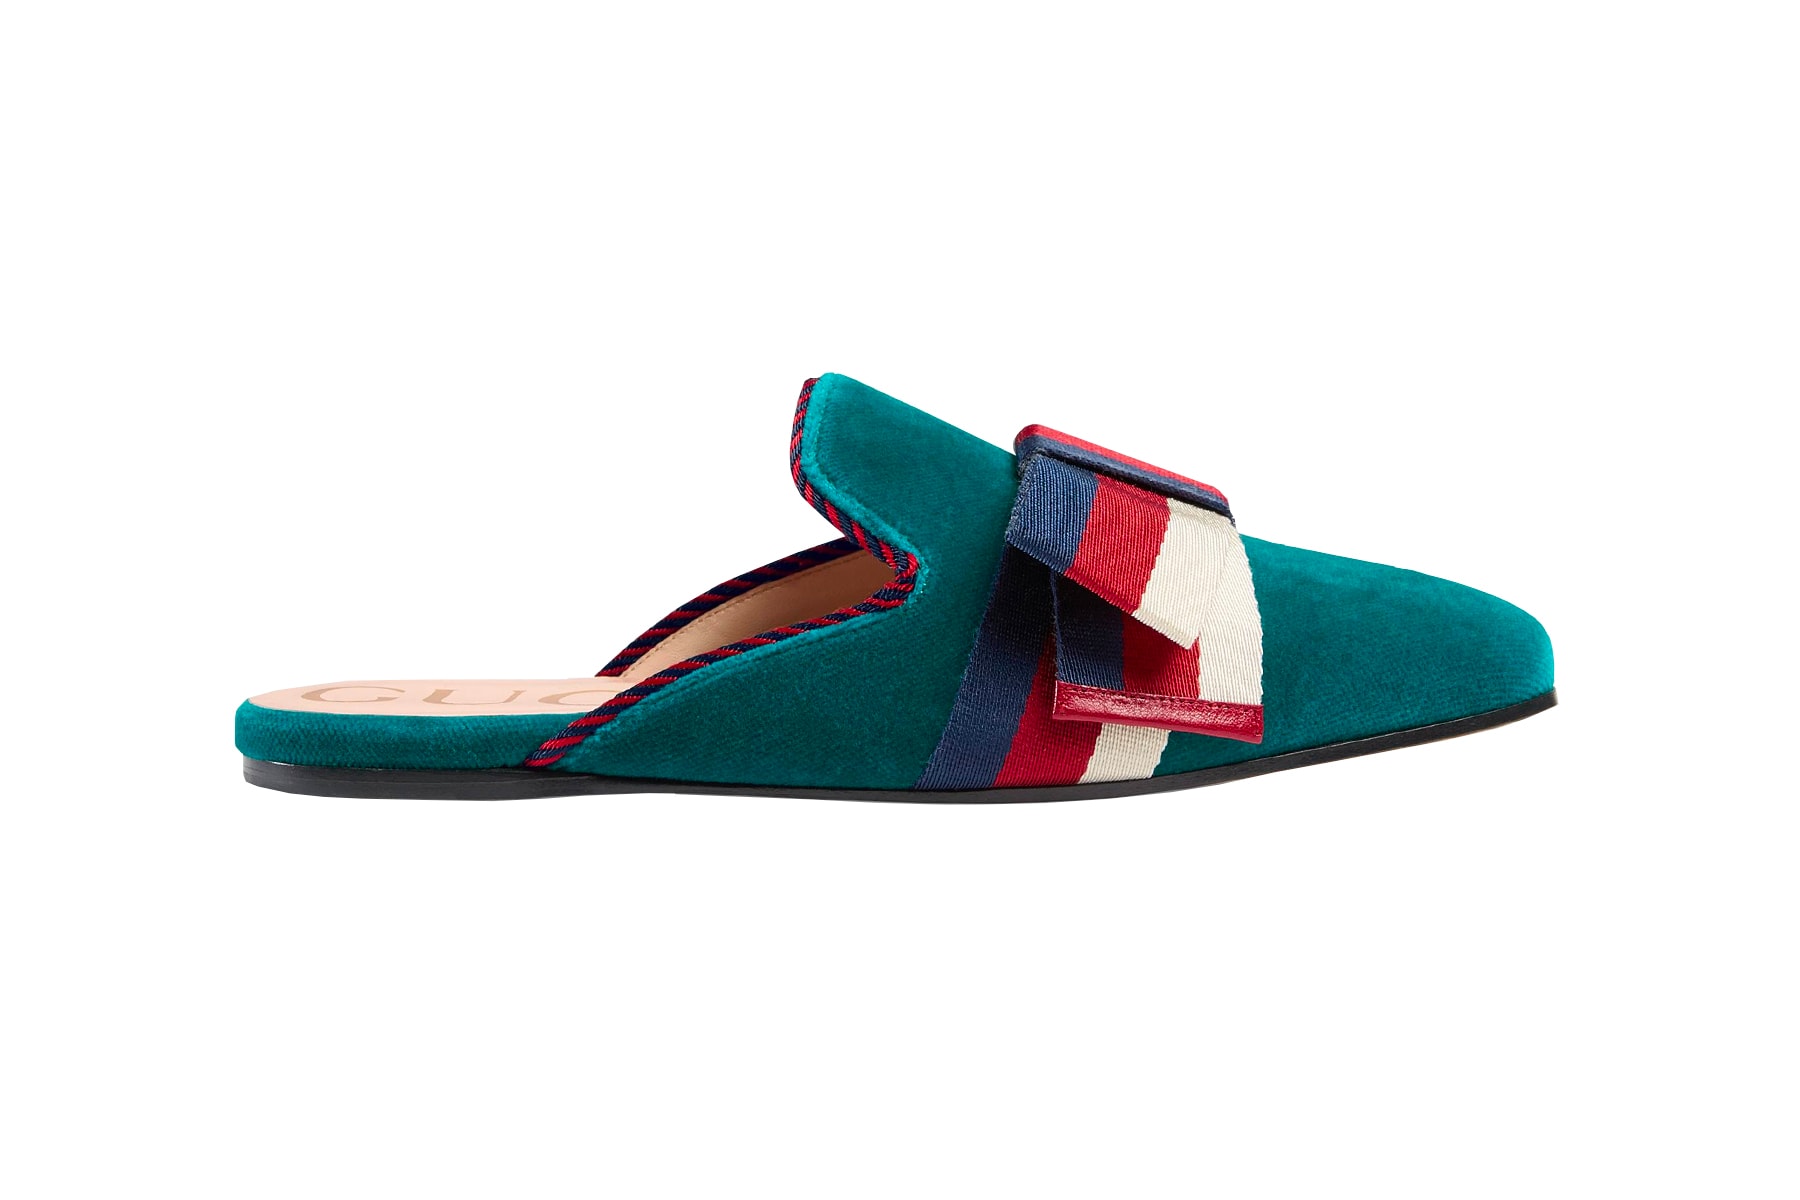 Gucci Velvet Slippers Sylvie Bow Hibiscus Red Blue Slides Mules Cruise 2018 Alessandro Michele